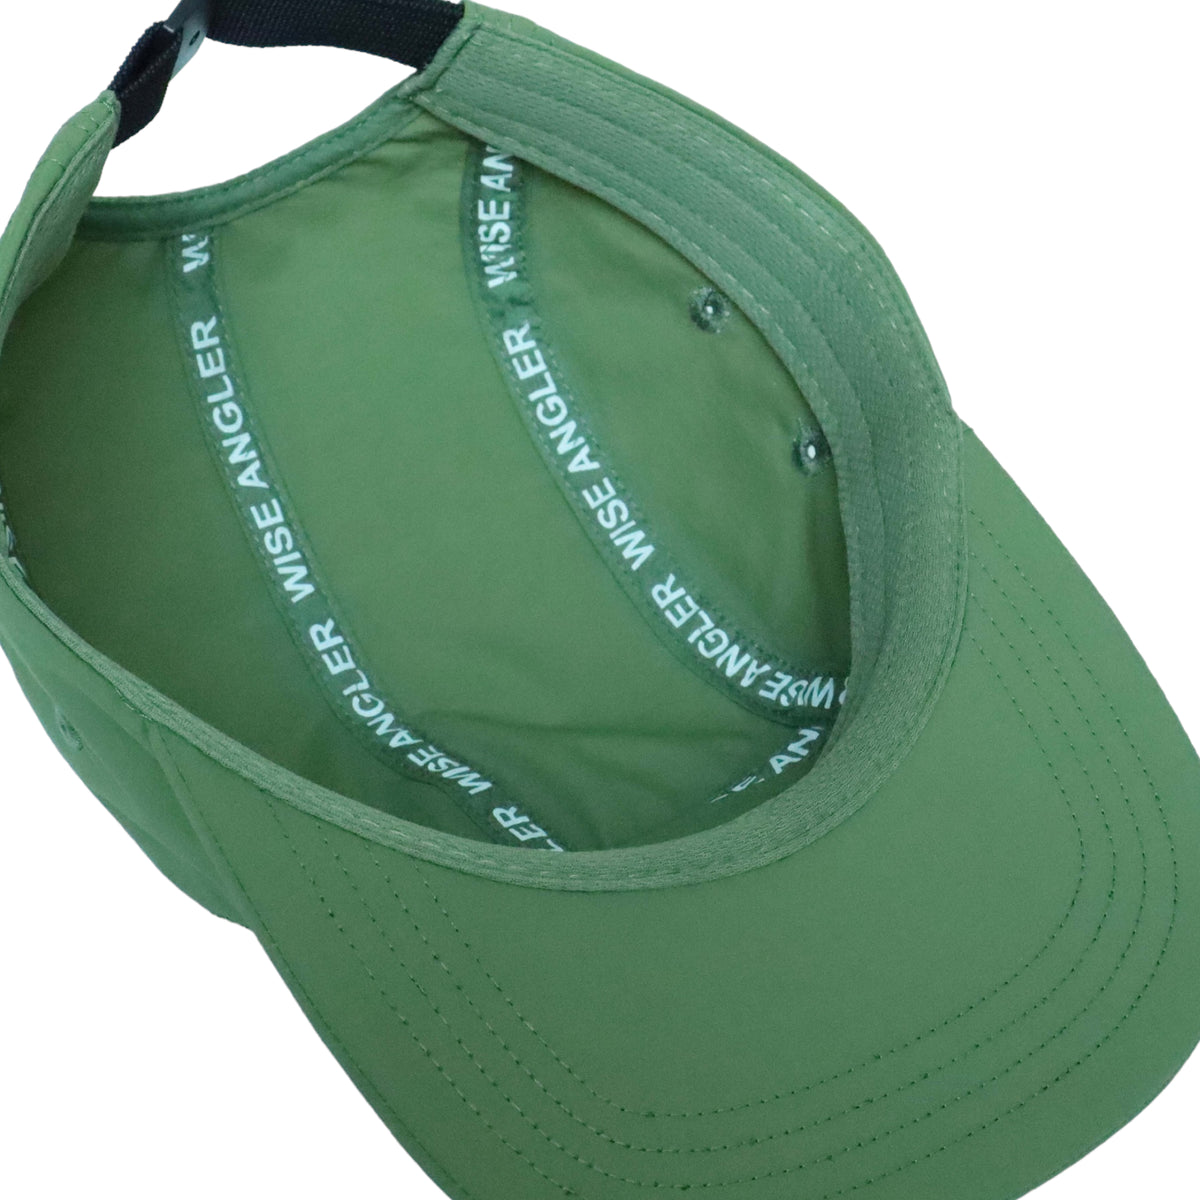 WISE ANGLER Debut Cap - Limited Edition